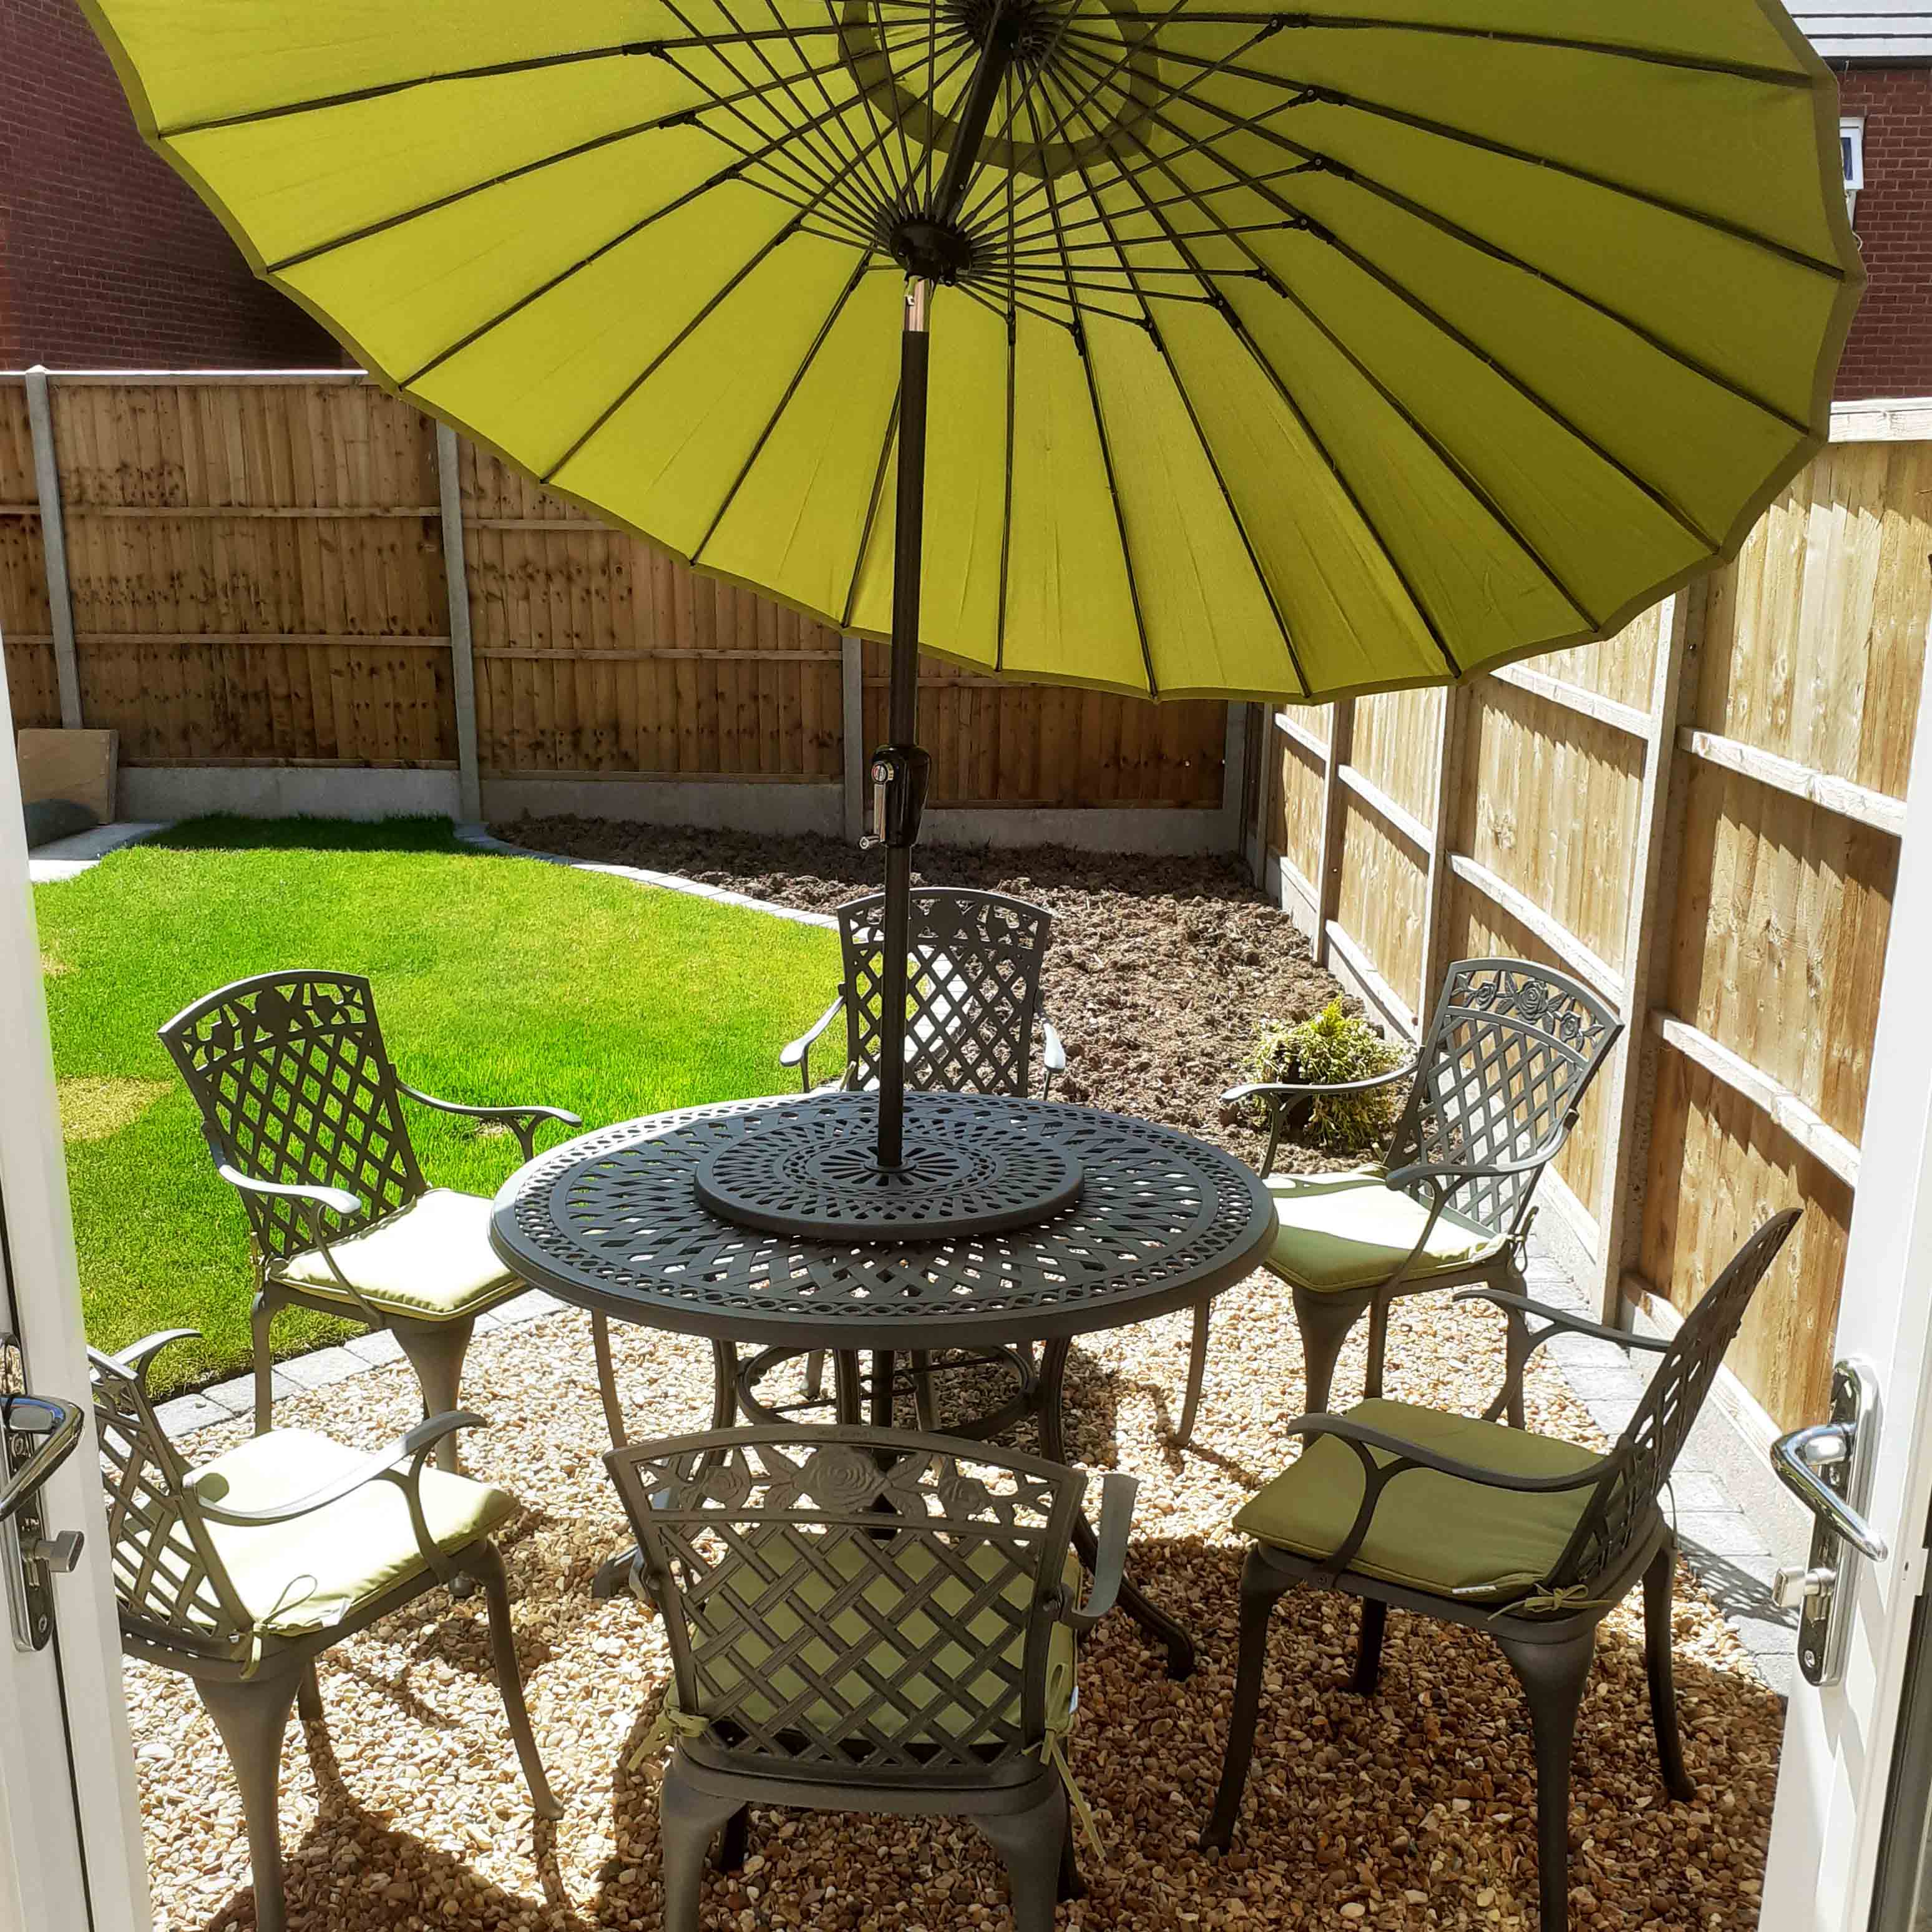 Alice Garden Furniture set with Parasol and Lazy Susan